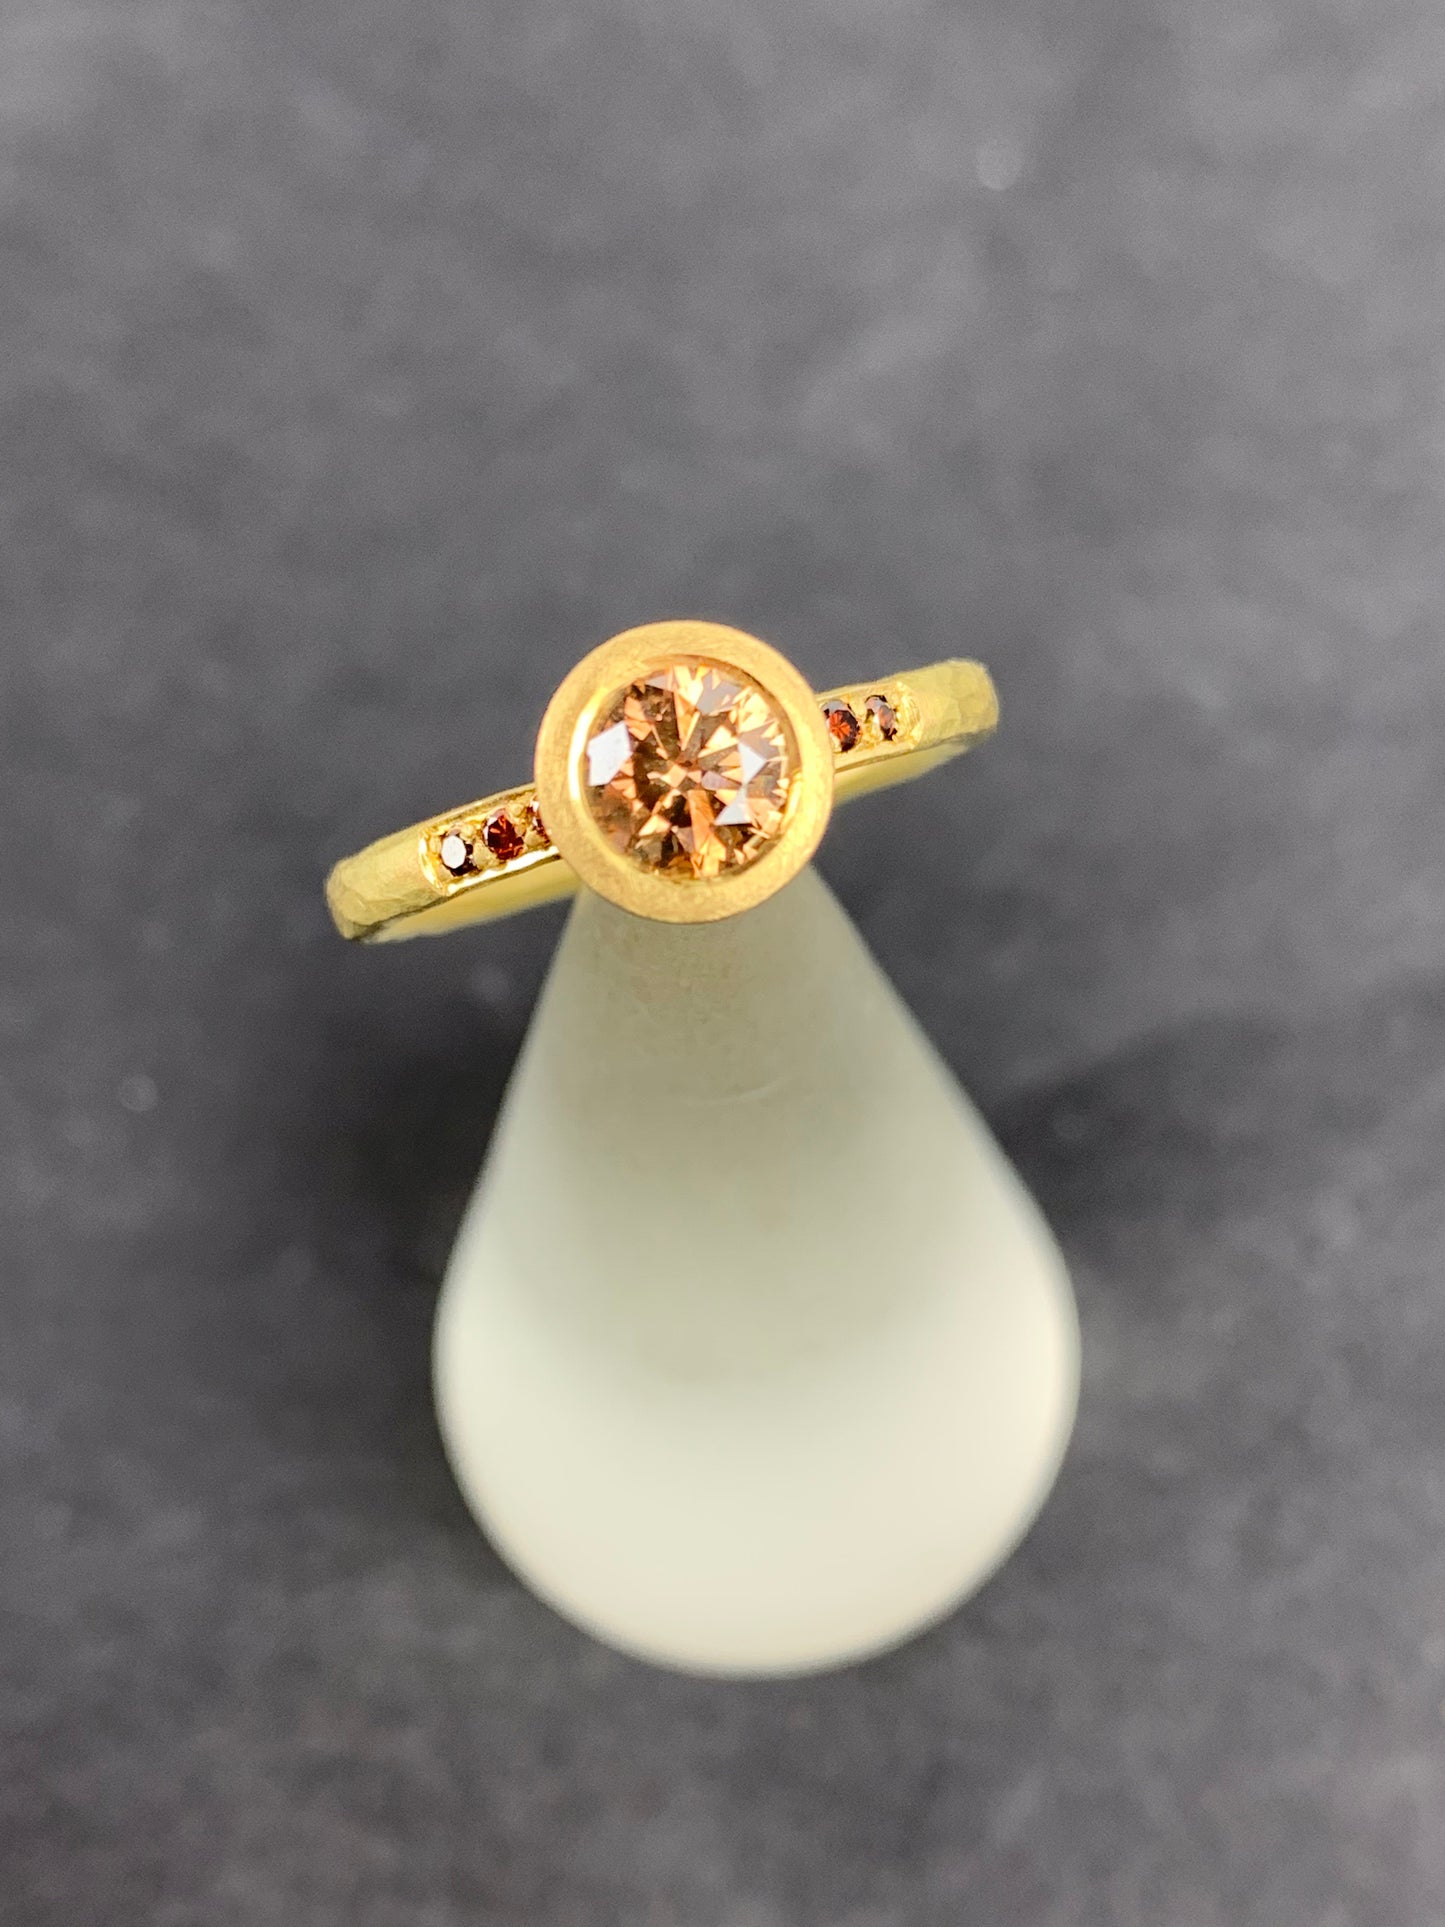 Betts, Malcolm - Gold Ring with Cognac Diamonds, Size L